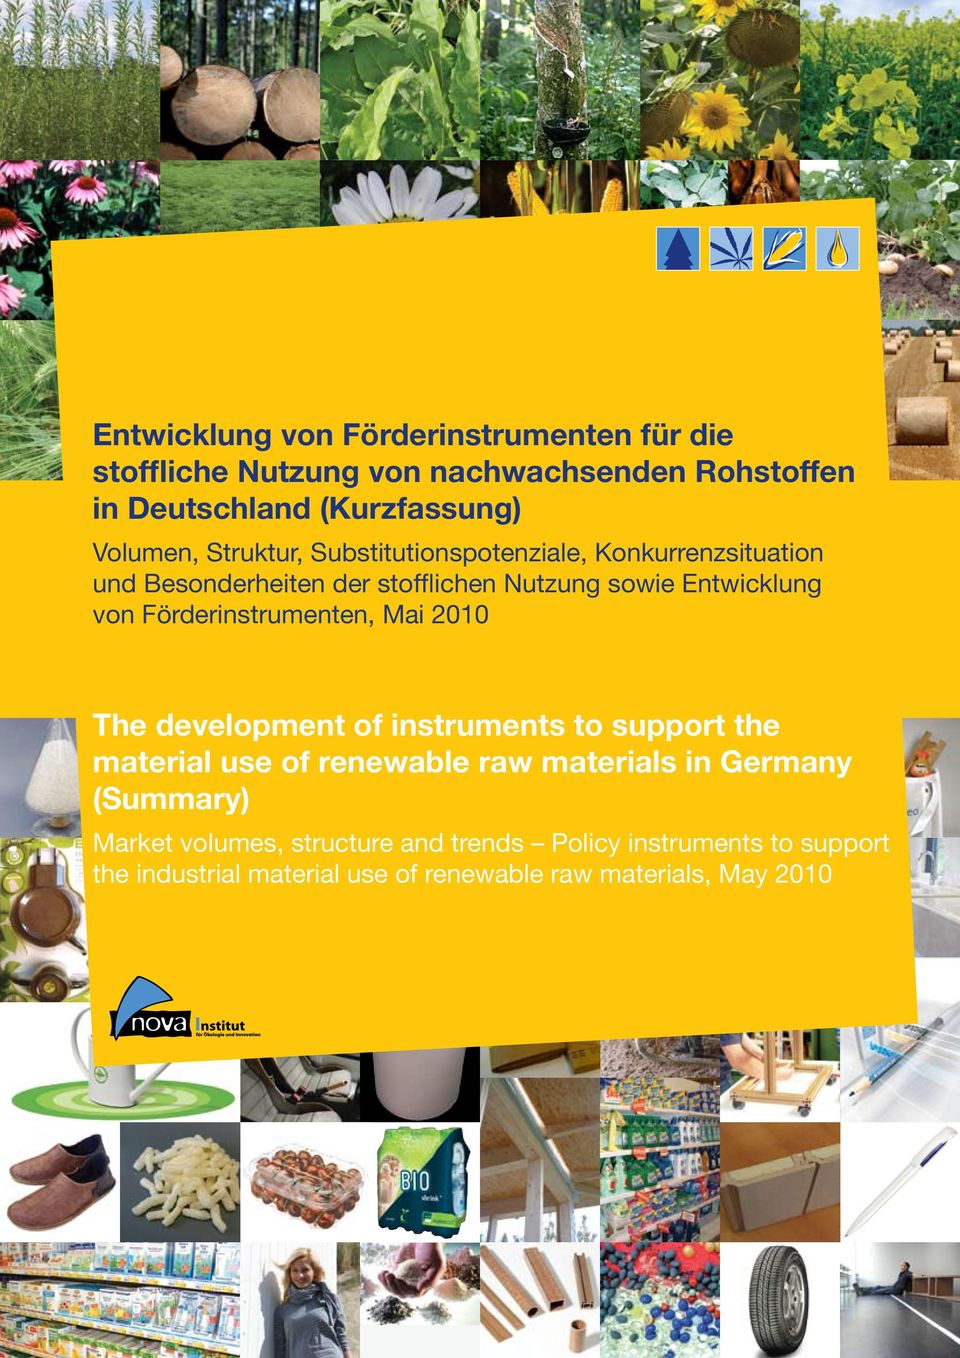 Entwicklung von Förderinstrumenten, Mai 2010 The development of instruments to support the material use of renewable raw materials in Germany